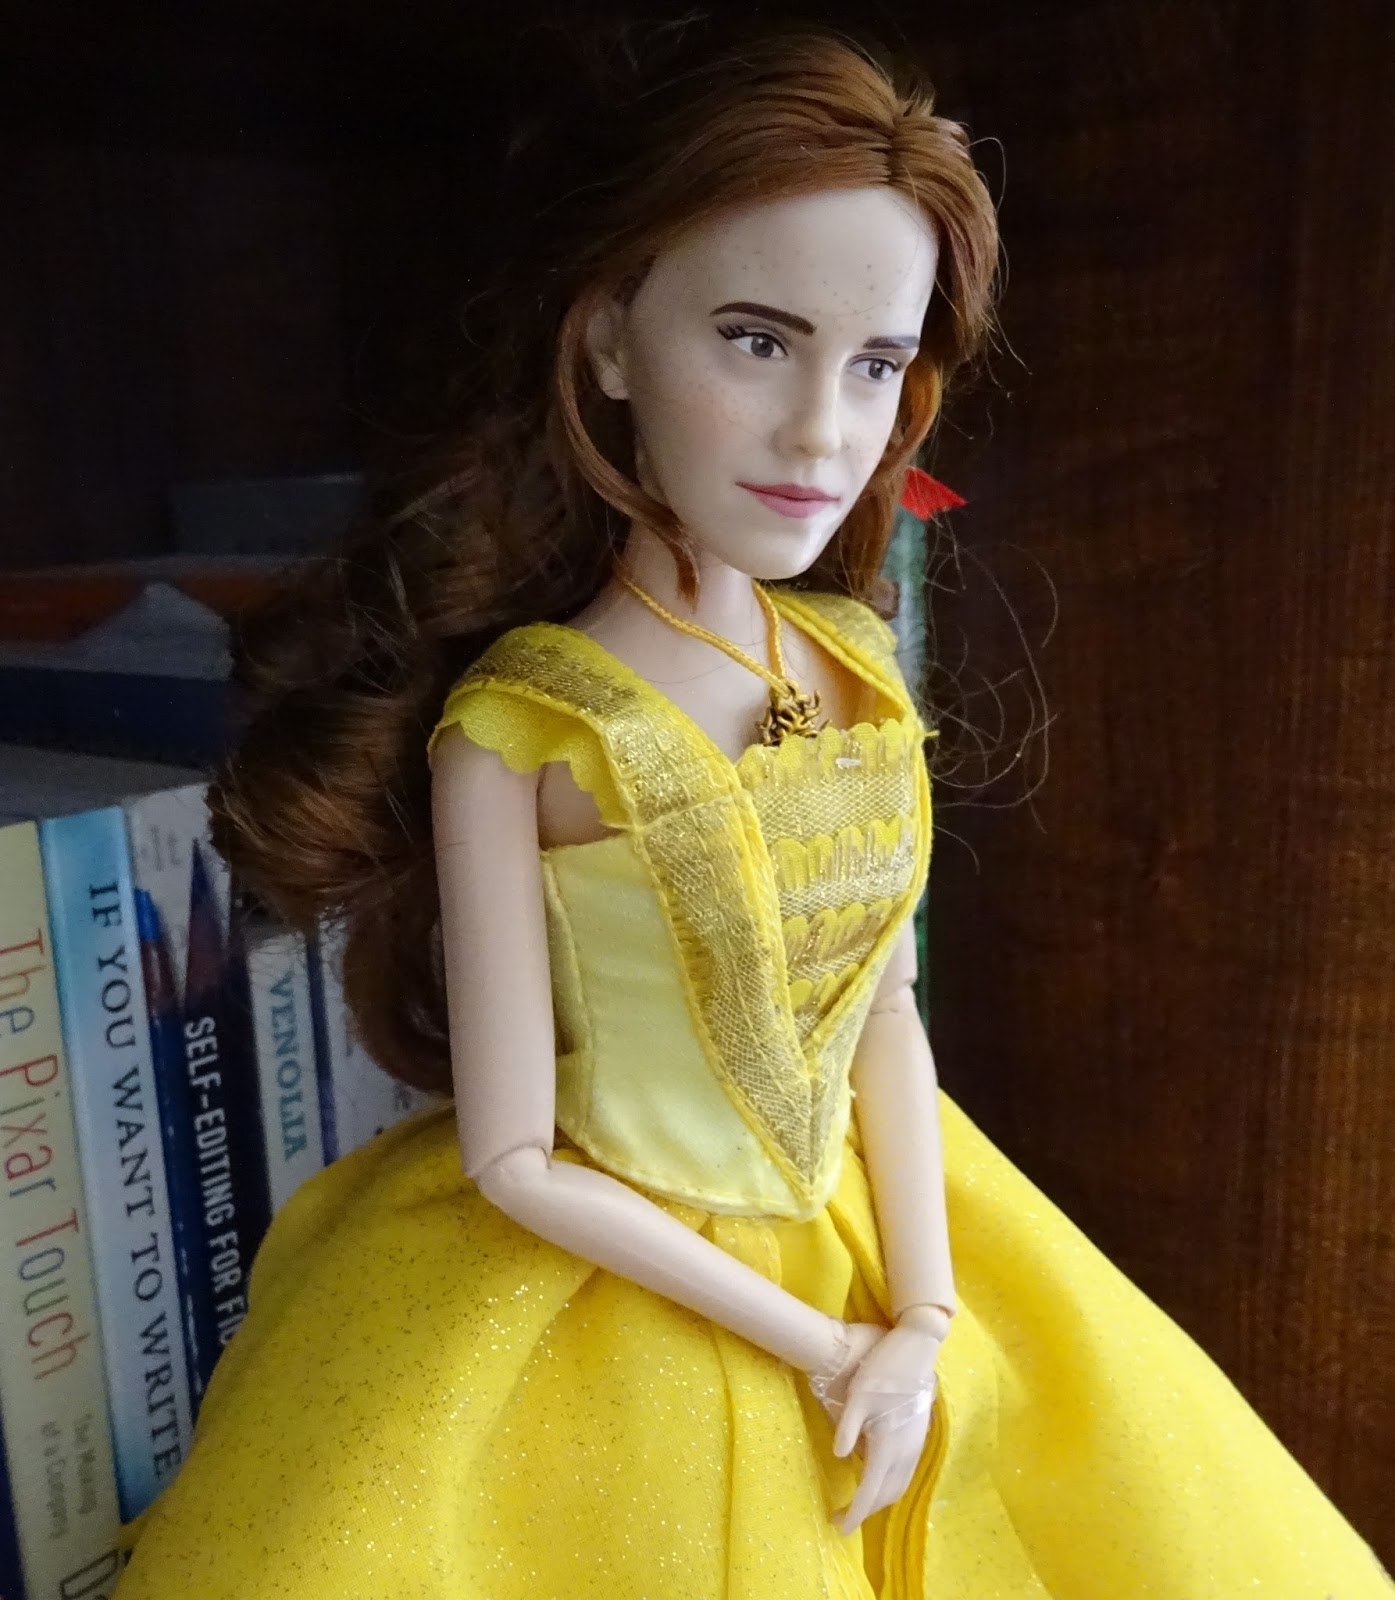 Completely Indie: That Creepy Beauty and the Beast Belle Doll